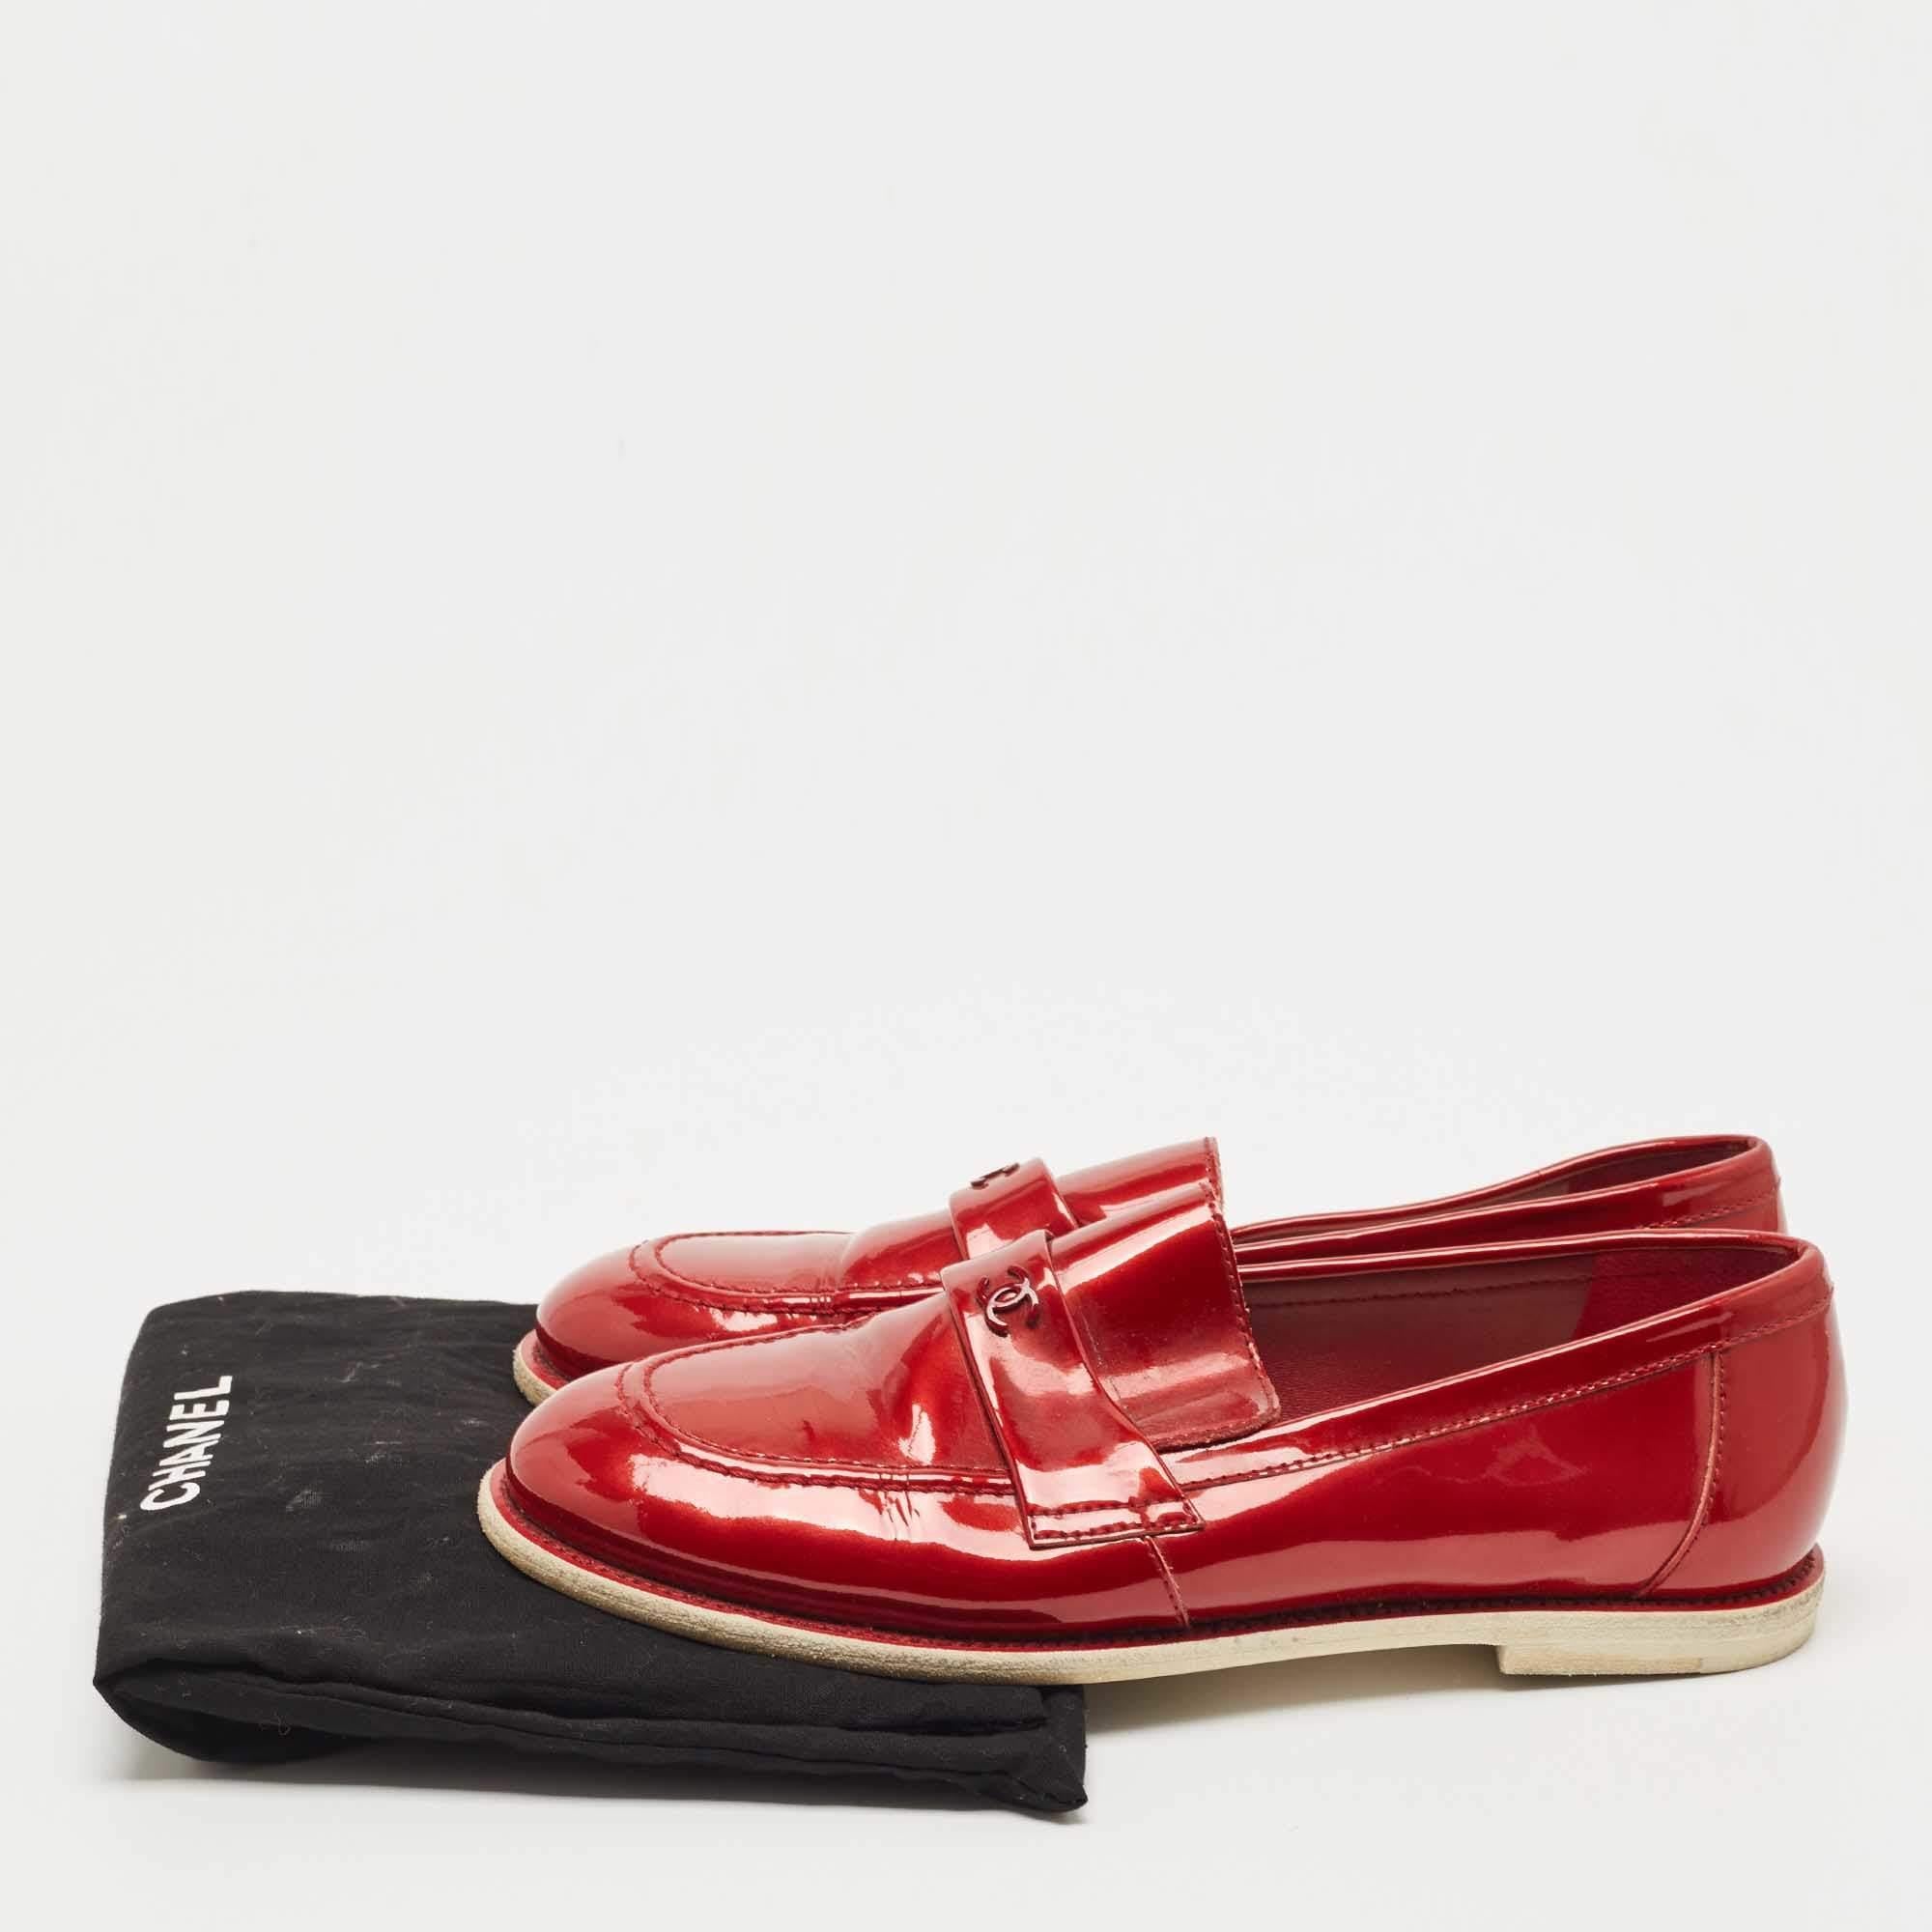 Chanel Red Patent Leather CC Loafers Size 37.5 4